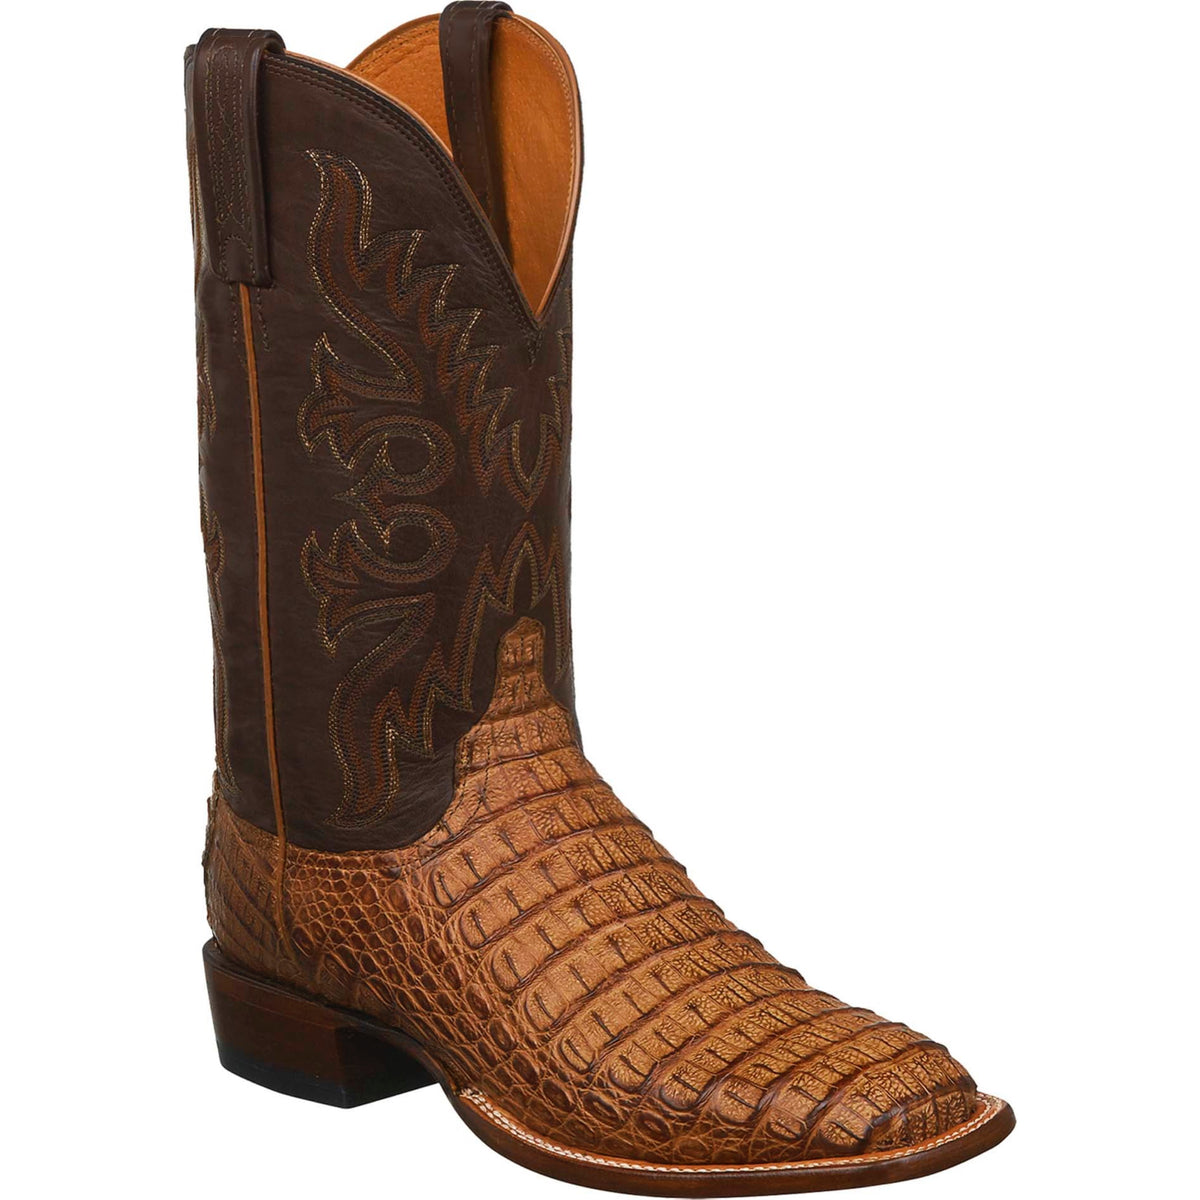 MEN’S LUCCHESE FISHER - TAN BURNISHED HORNBACK BOOTS - El Toro Boots